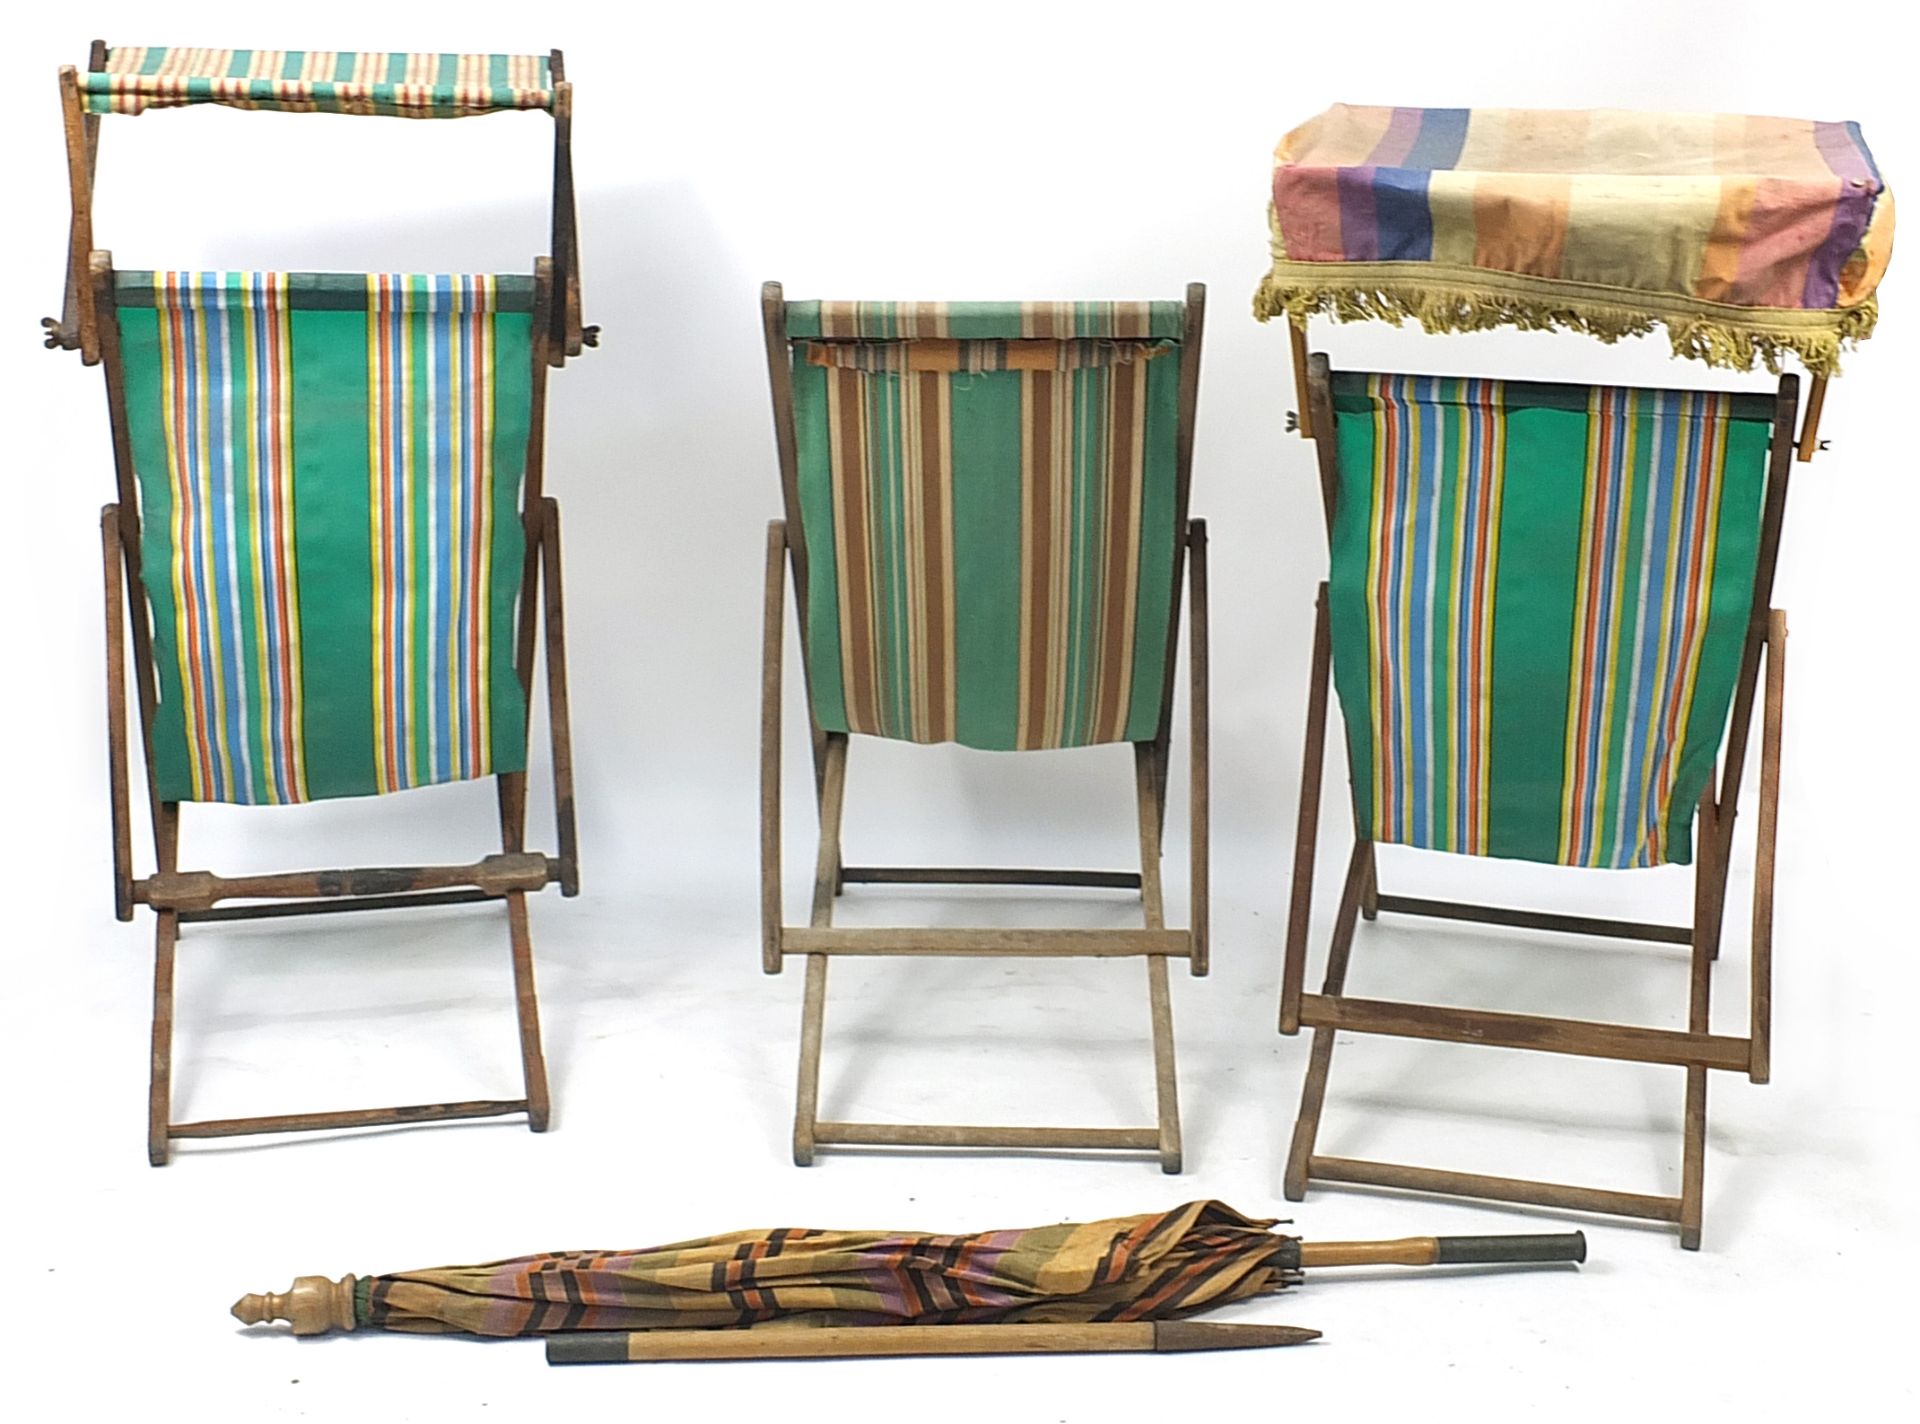 Three vintage teak folding deck chairs and parasol - Image 2 of 2